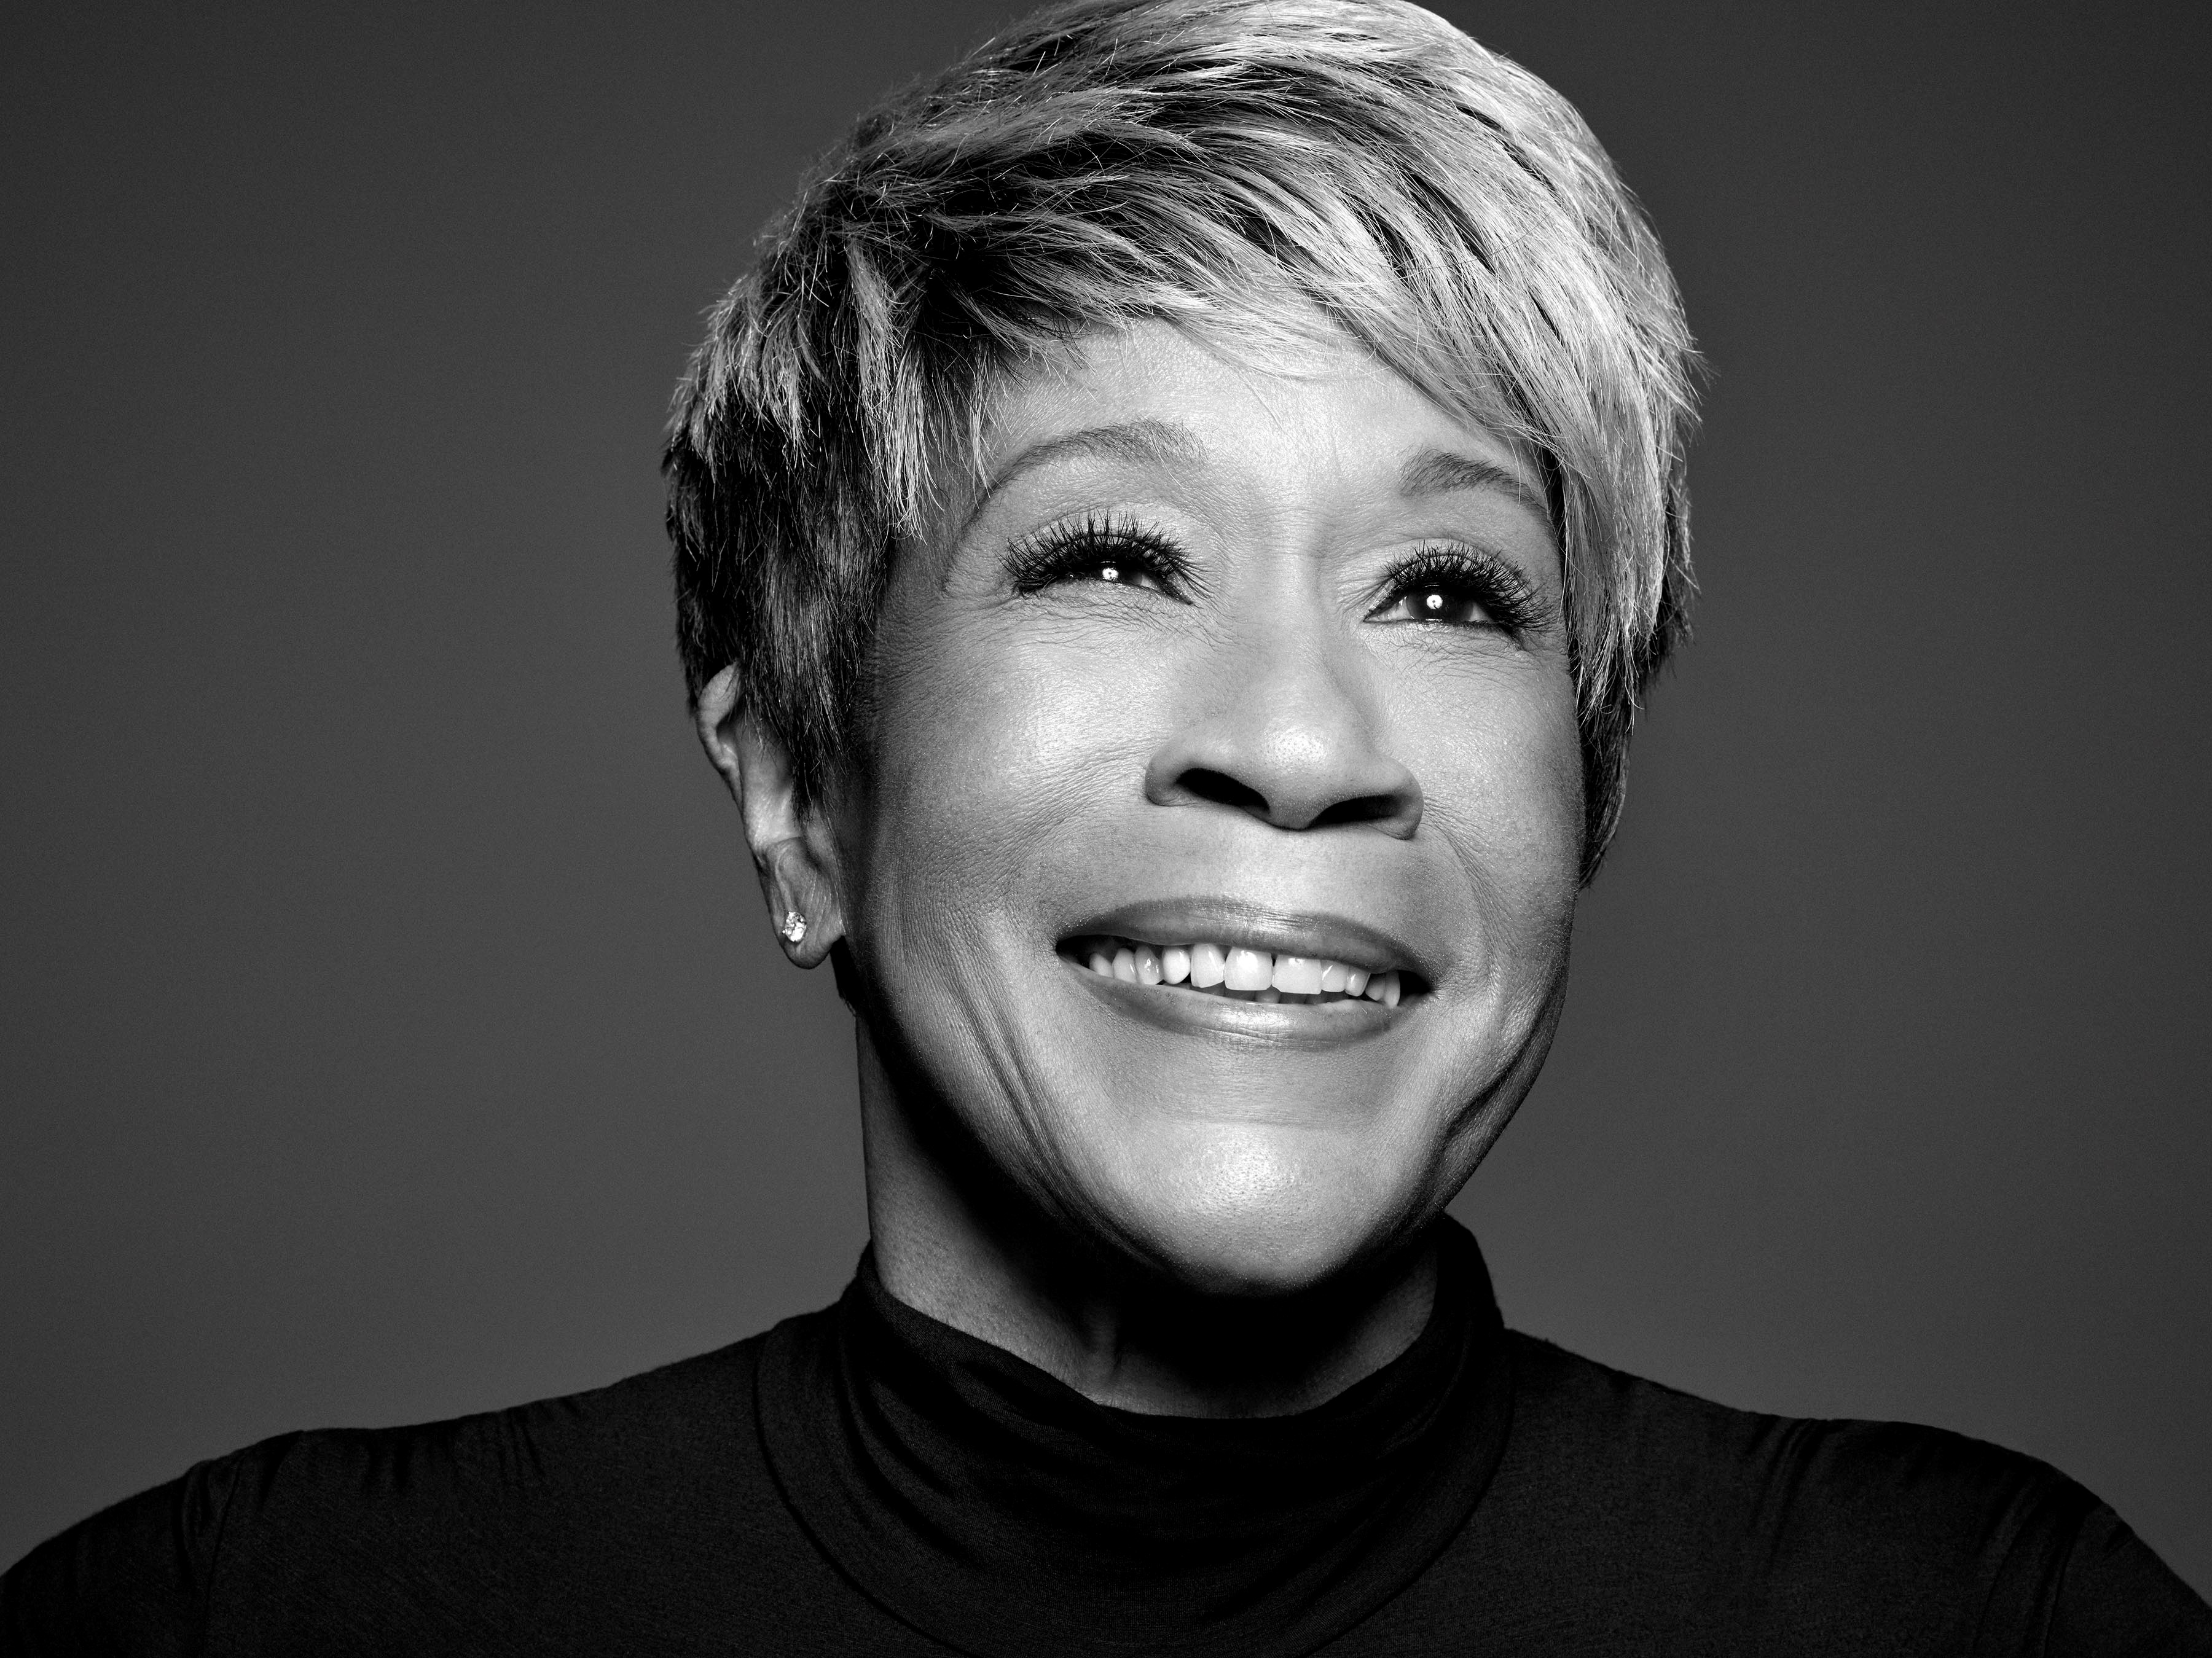 The Vocal Prowess of Bettye LaVette to Headline Black Arts Fest mke!